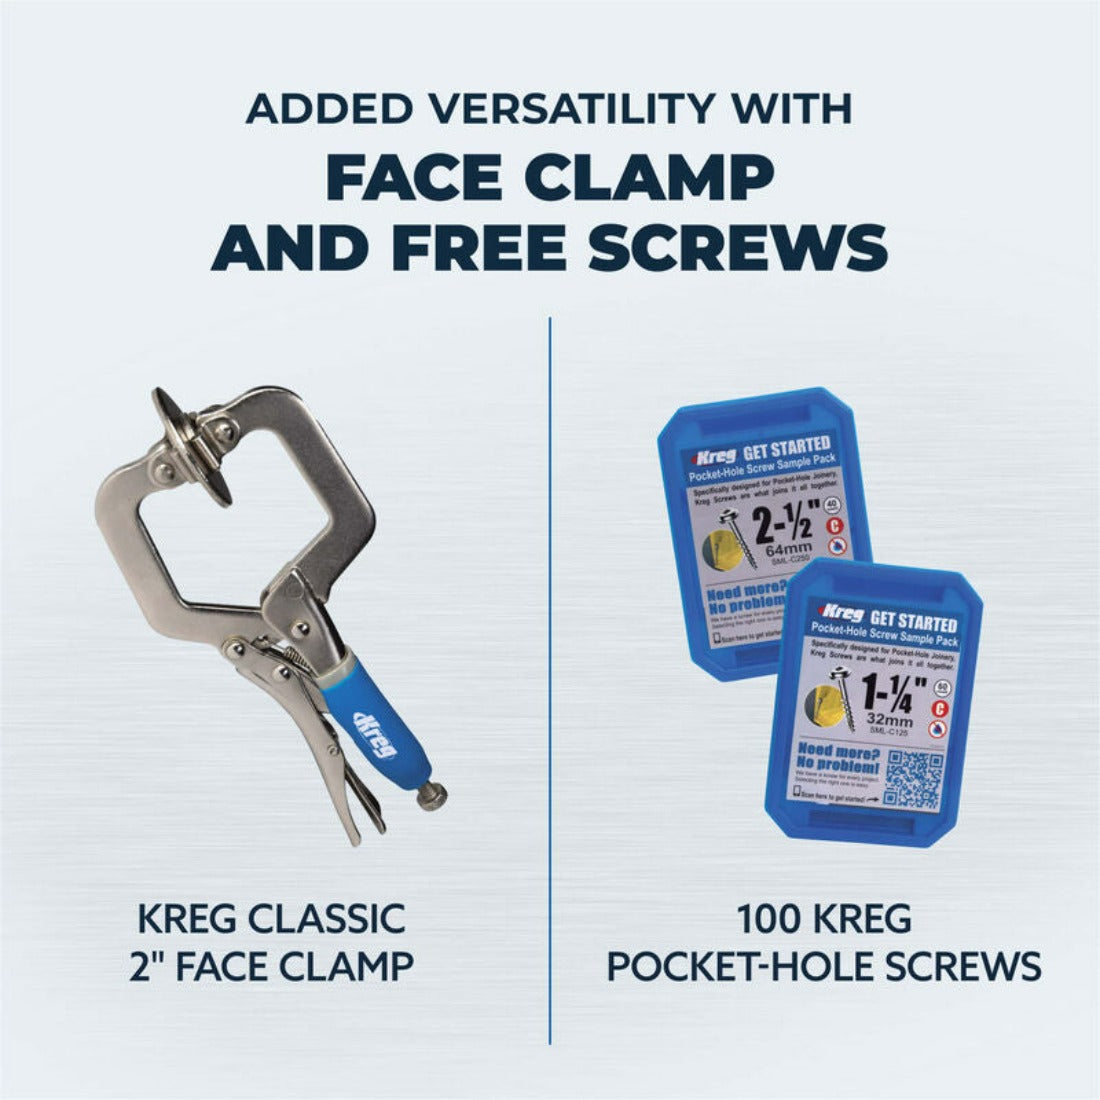 image showing free 50mm face clamp and two packs of screws with 520pro jig